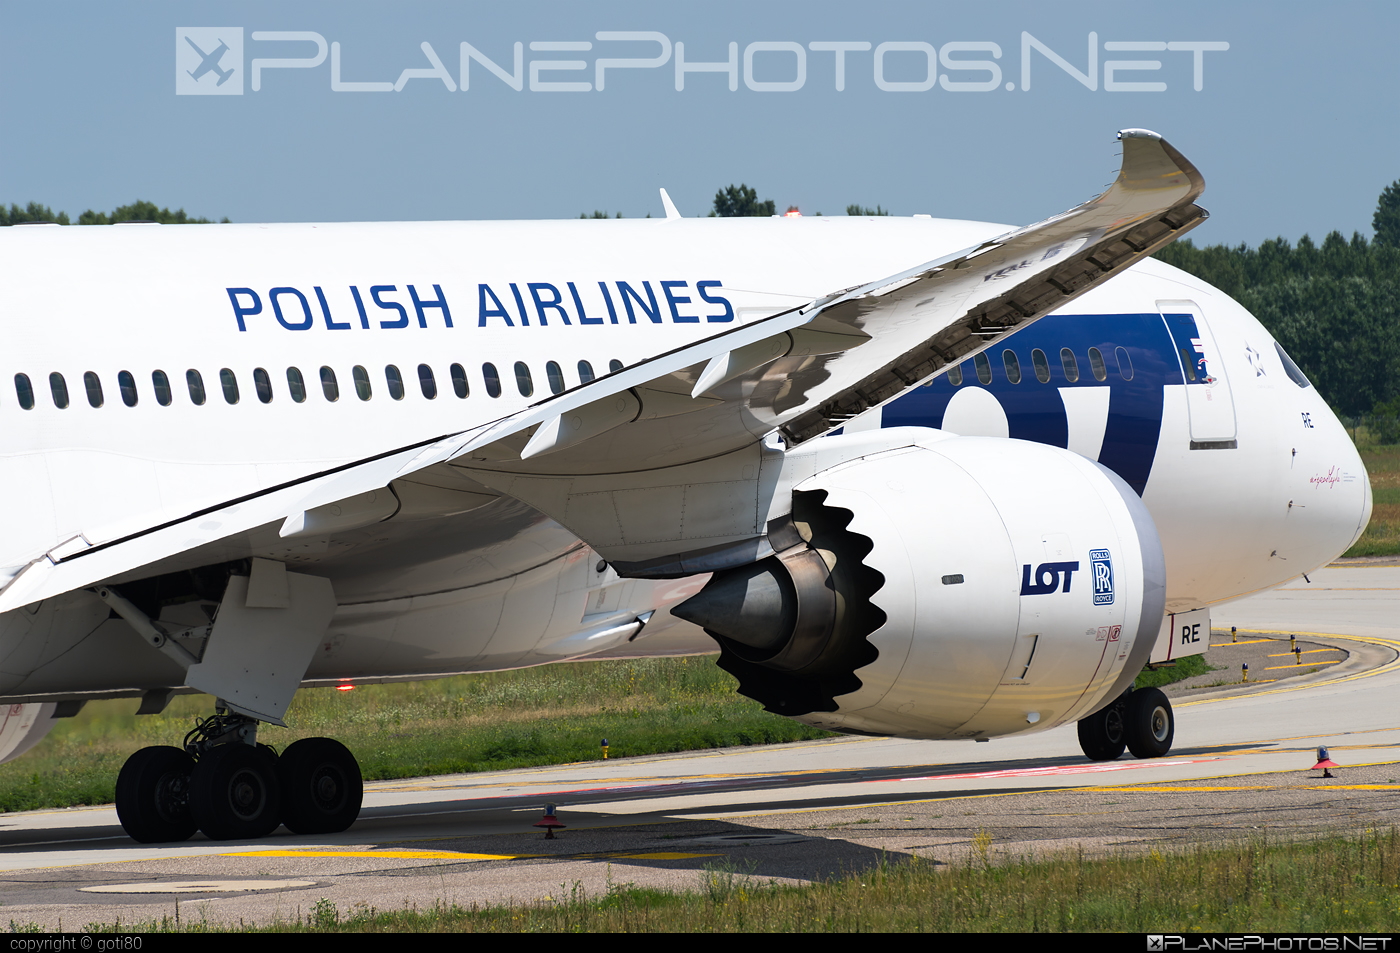 Boeing 787-8 Dreamliner - SP-LRE operated by LOT Polish Airlines #b787 #boeing #boeing787 #dreamliner #lot #lotpolishairlines